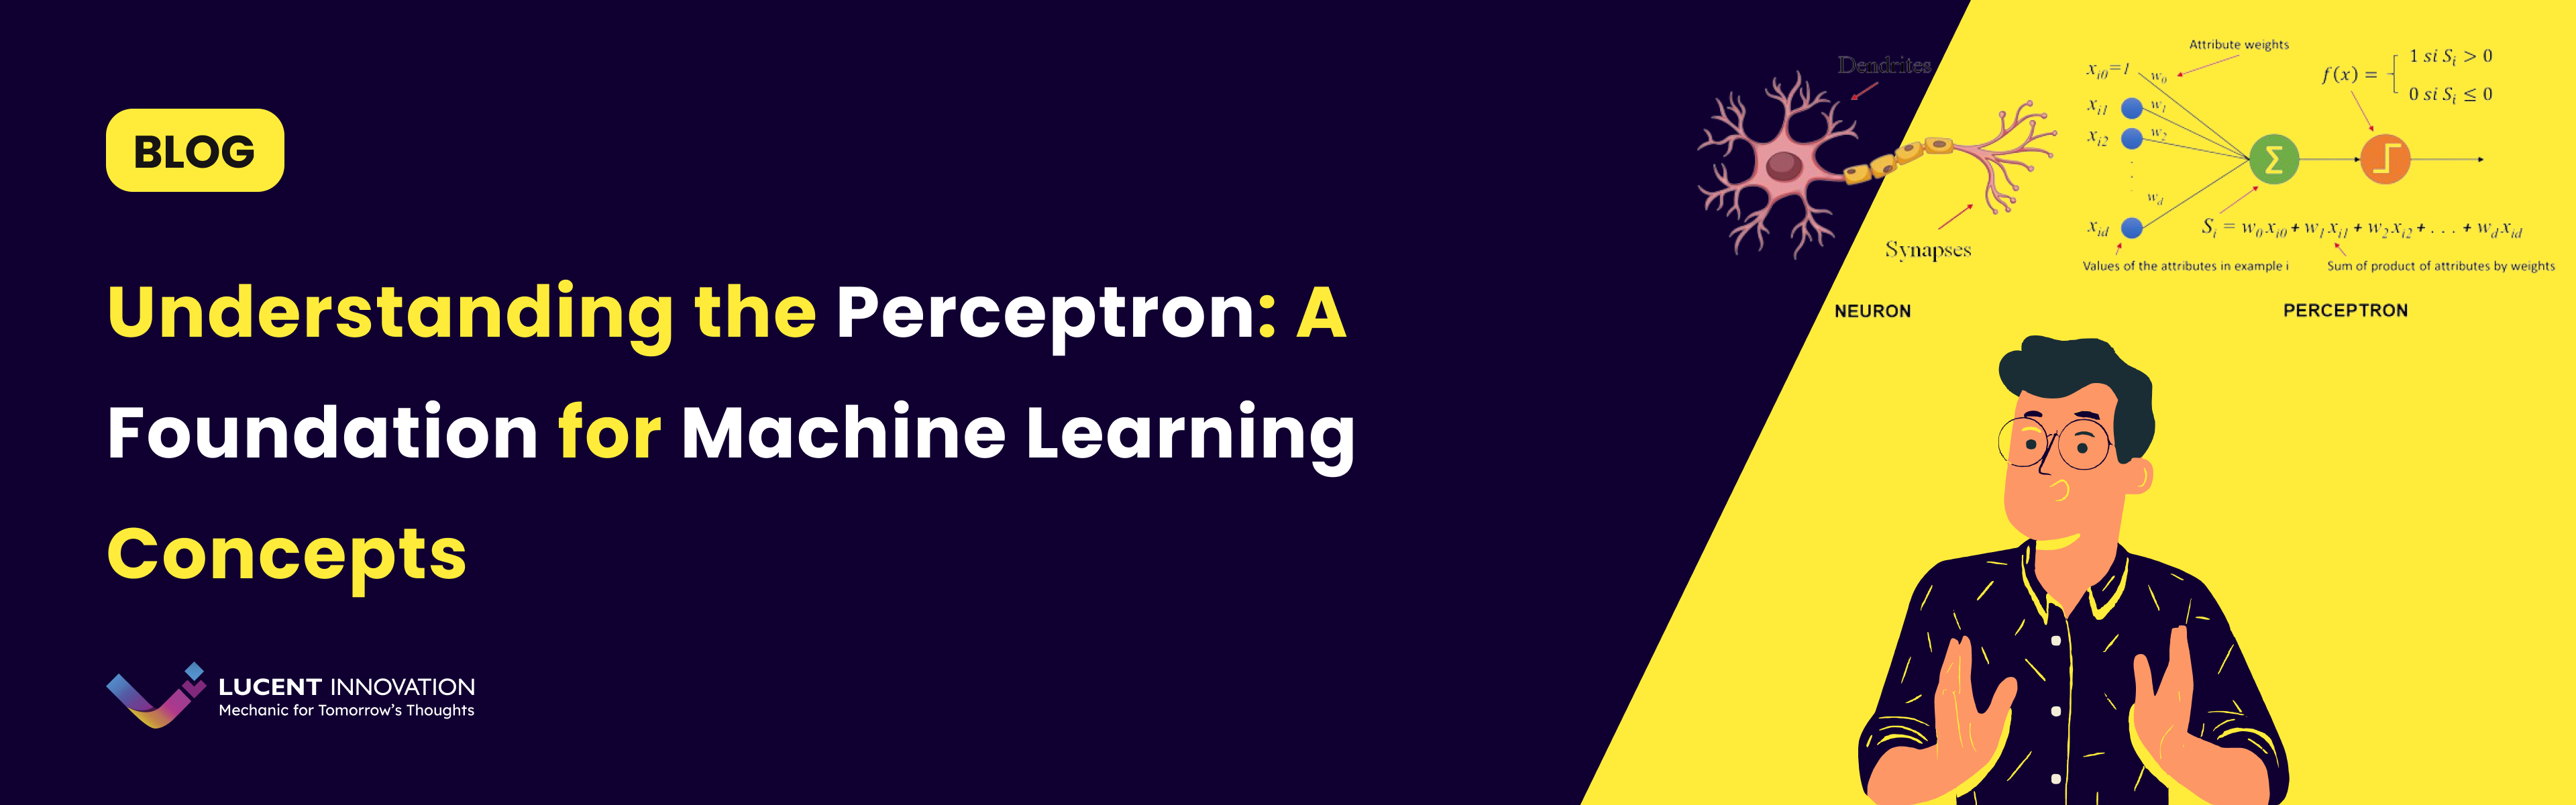 Understanding the Perceptron: A Foundation for Machine Learning Concepts